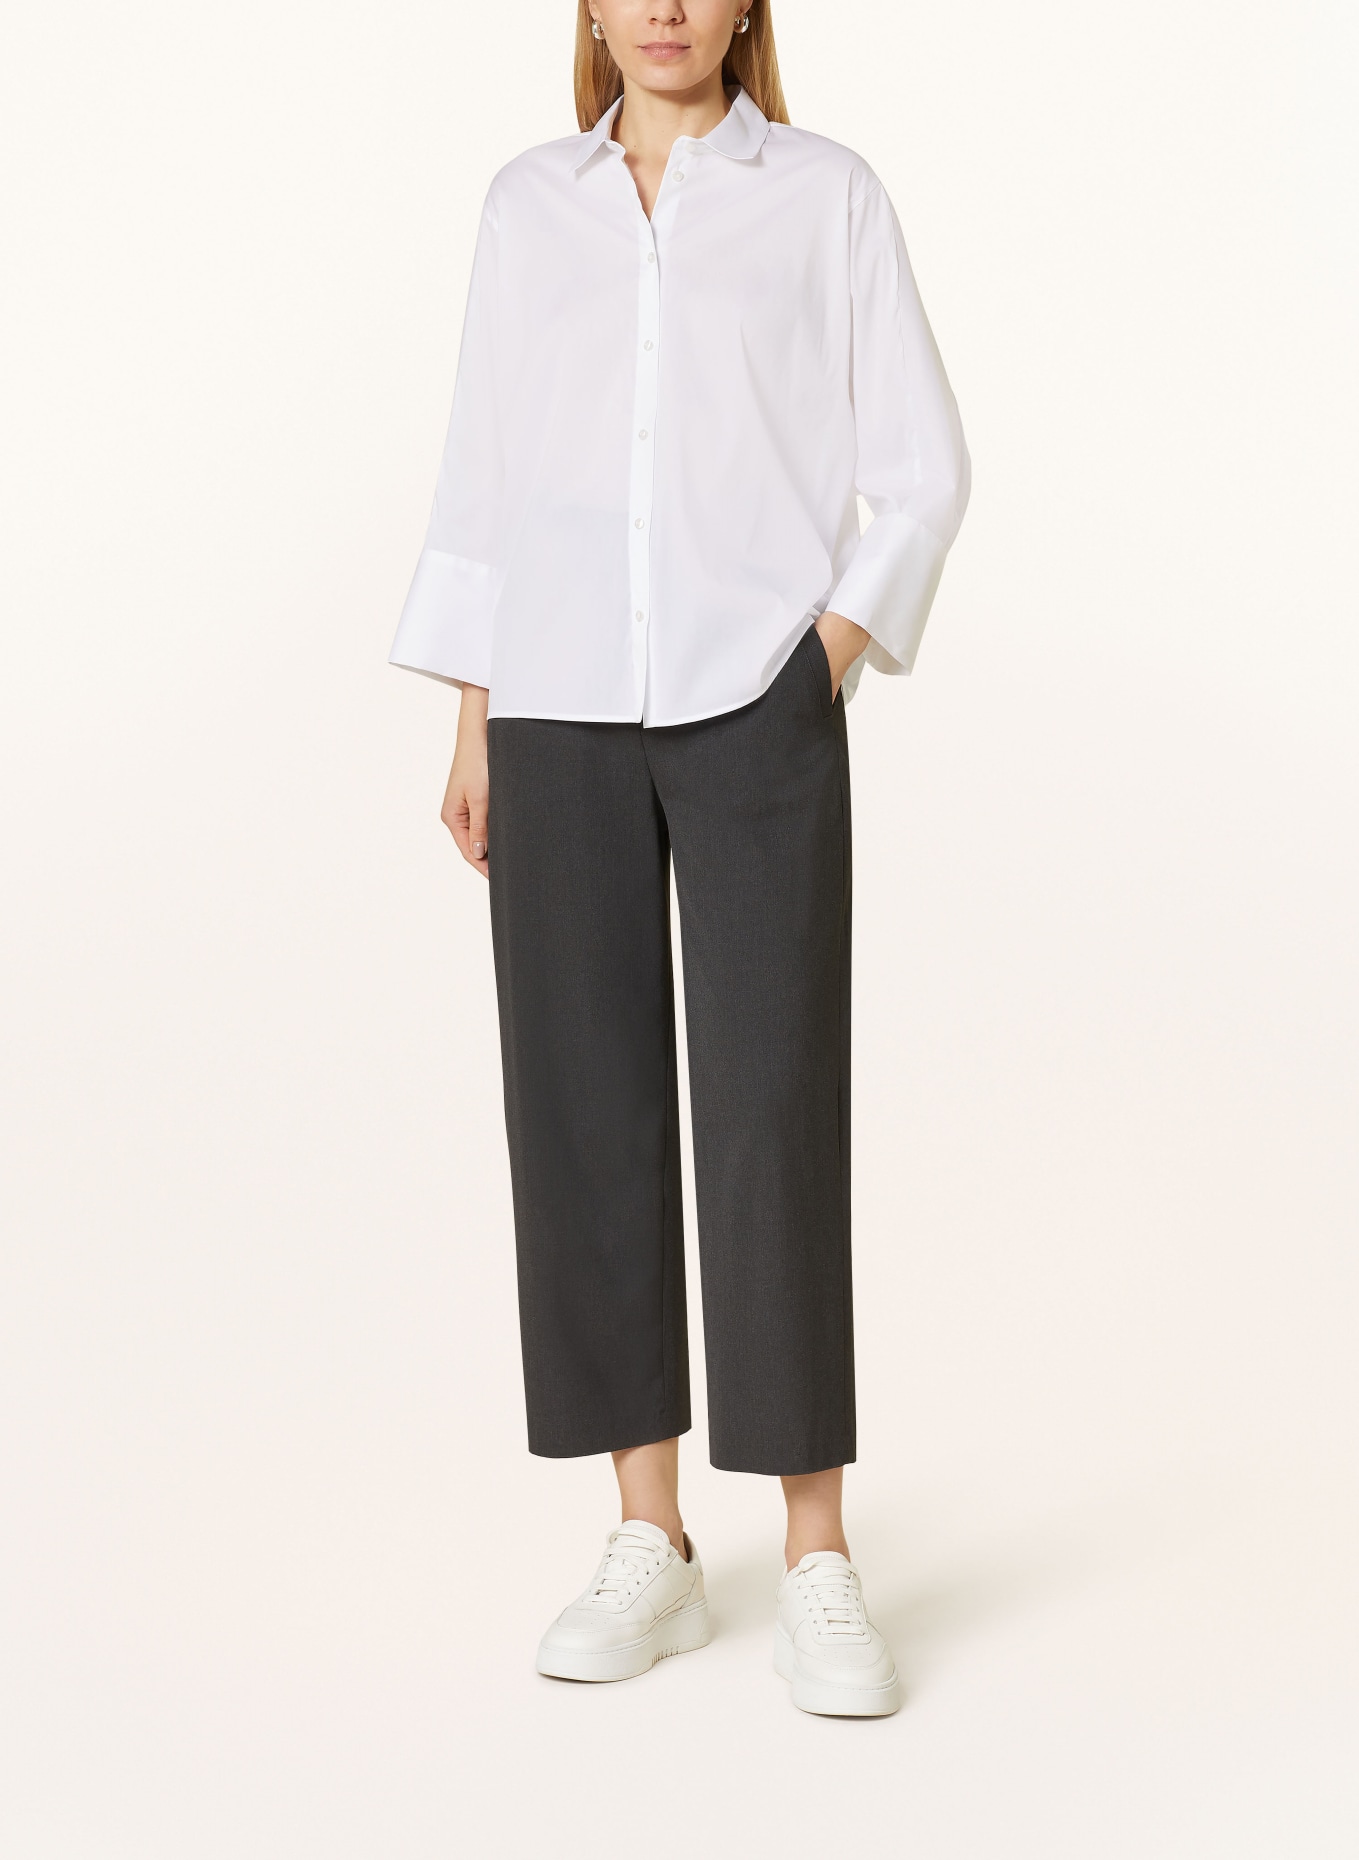 JOOP! Shirt blouse with 3/4 sleeves, Color: WHITE (Image 2)